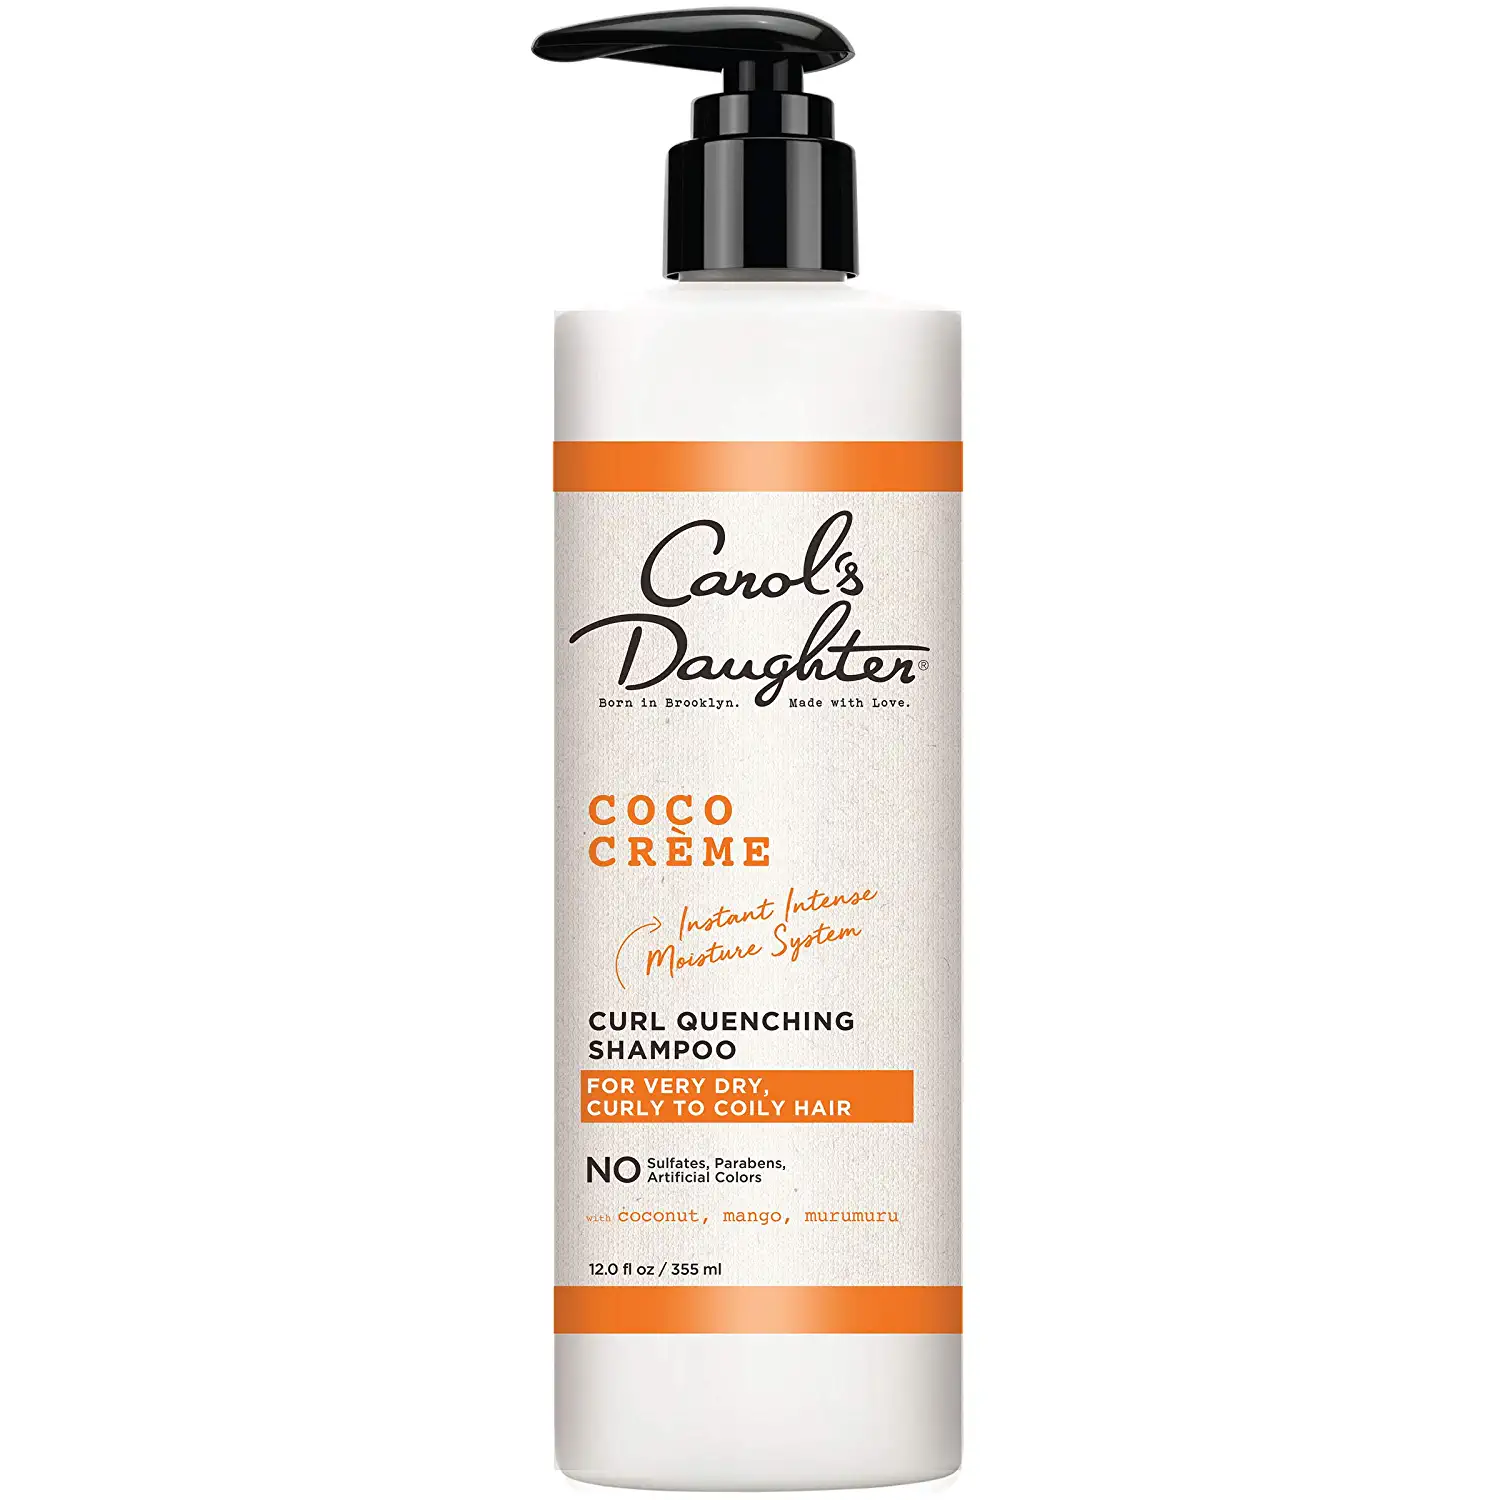 Carol’s Daughter Sulfate-Free Curly Hair Shampoo